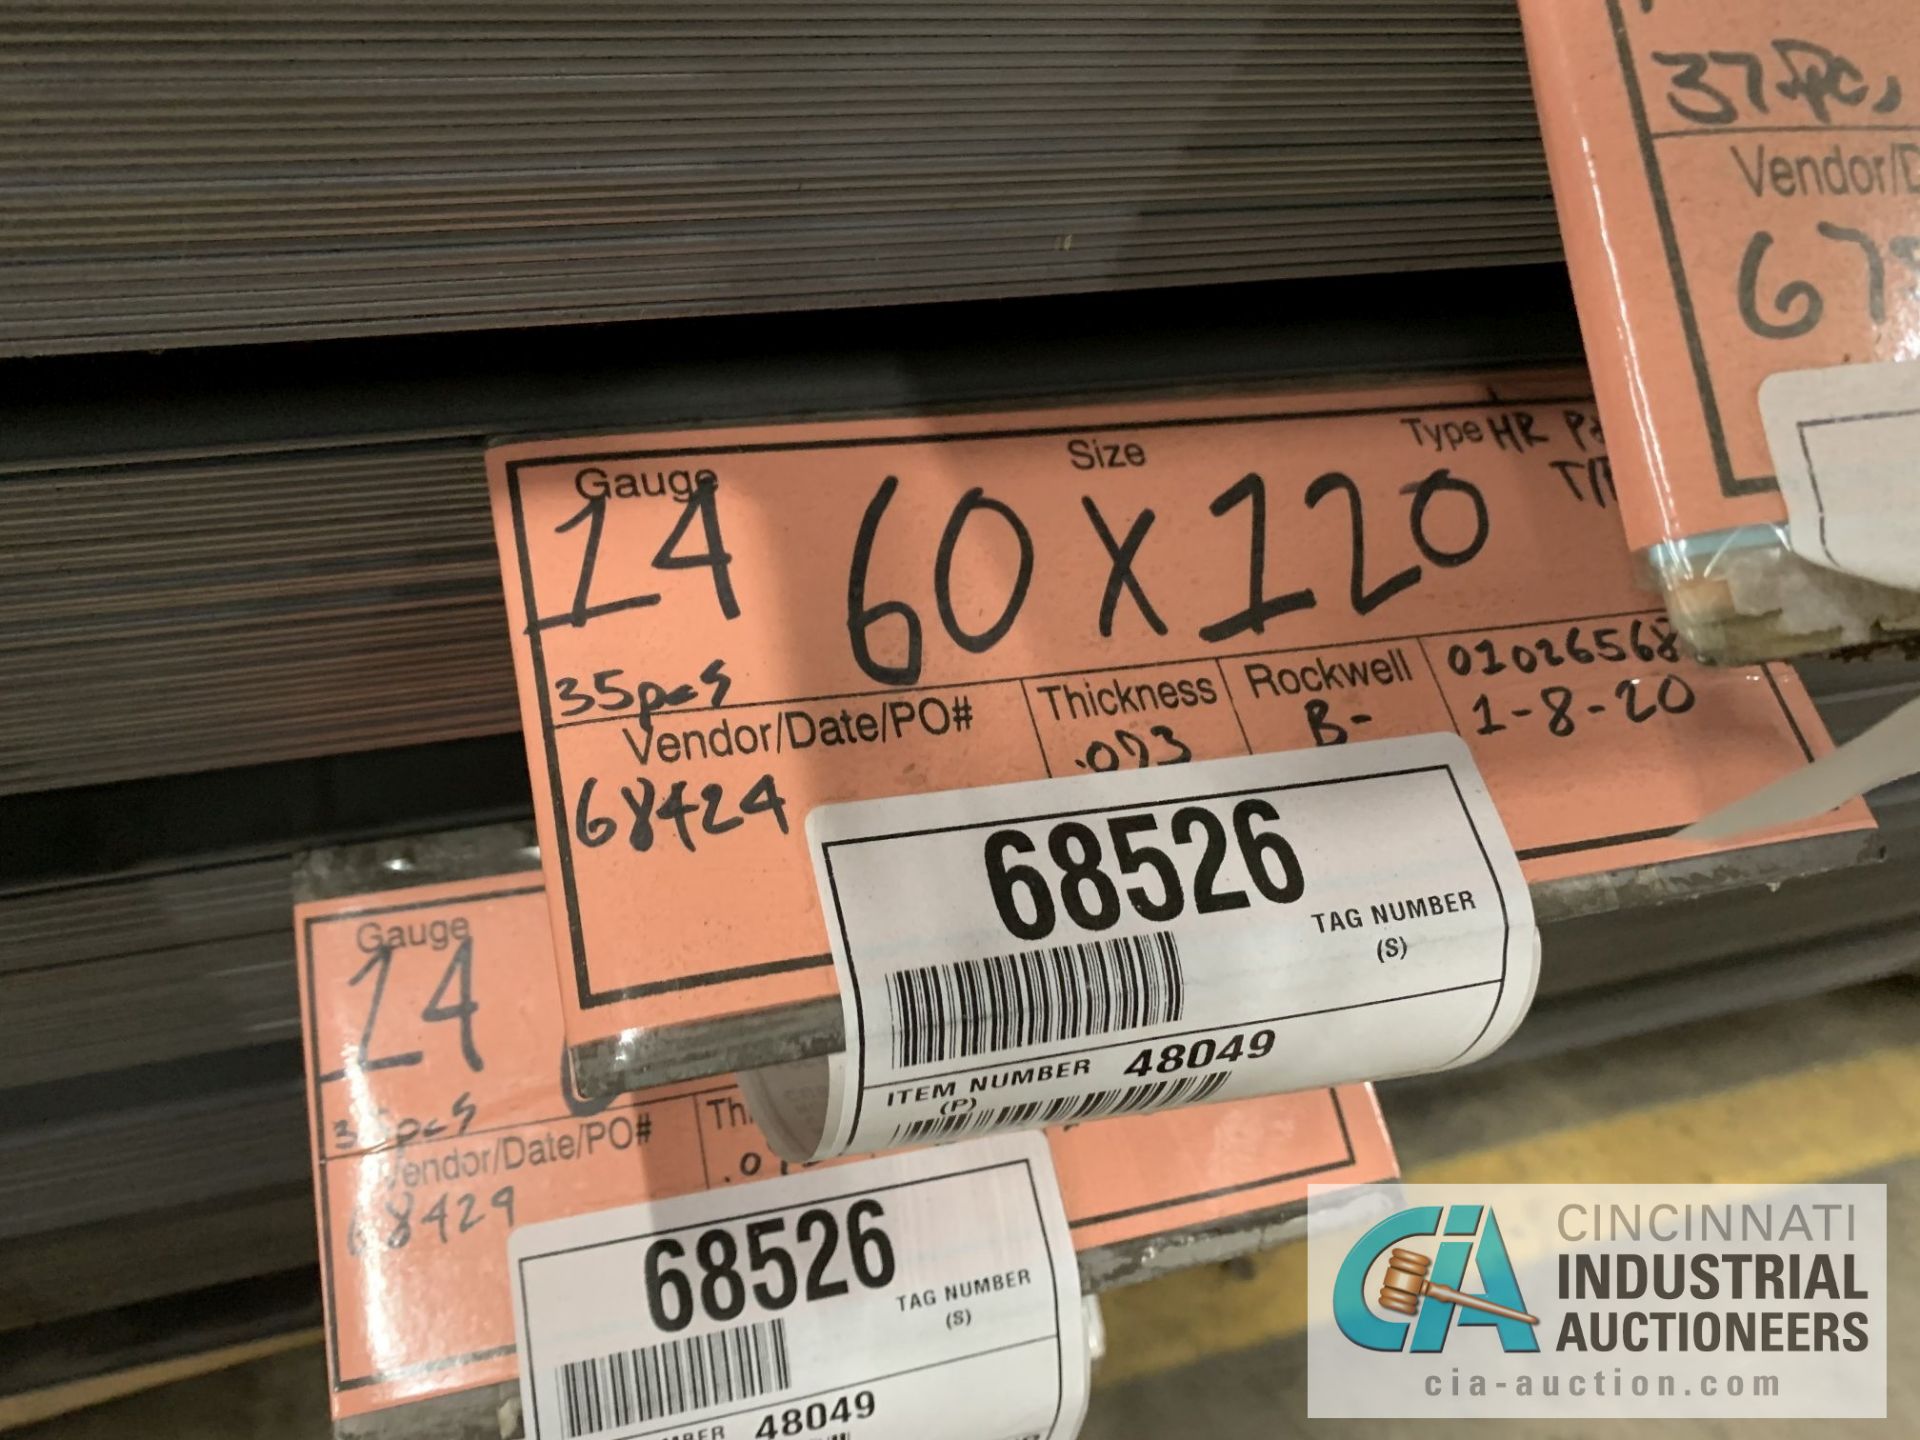 (LOT) APPROX. 41,356 LBS. UNCOATED SHEET STEEL, 1-STACK, 8-BUNDLES, SEE INVENTORY FOR LISTING. - Image 5 of 10